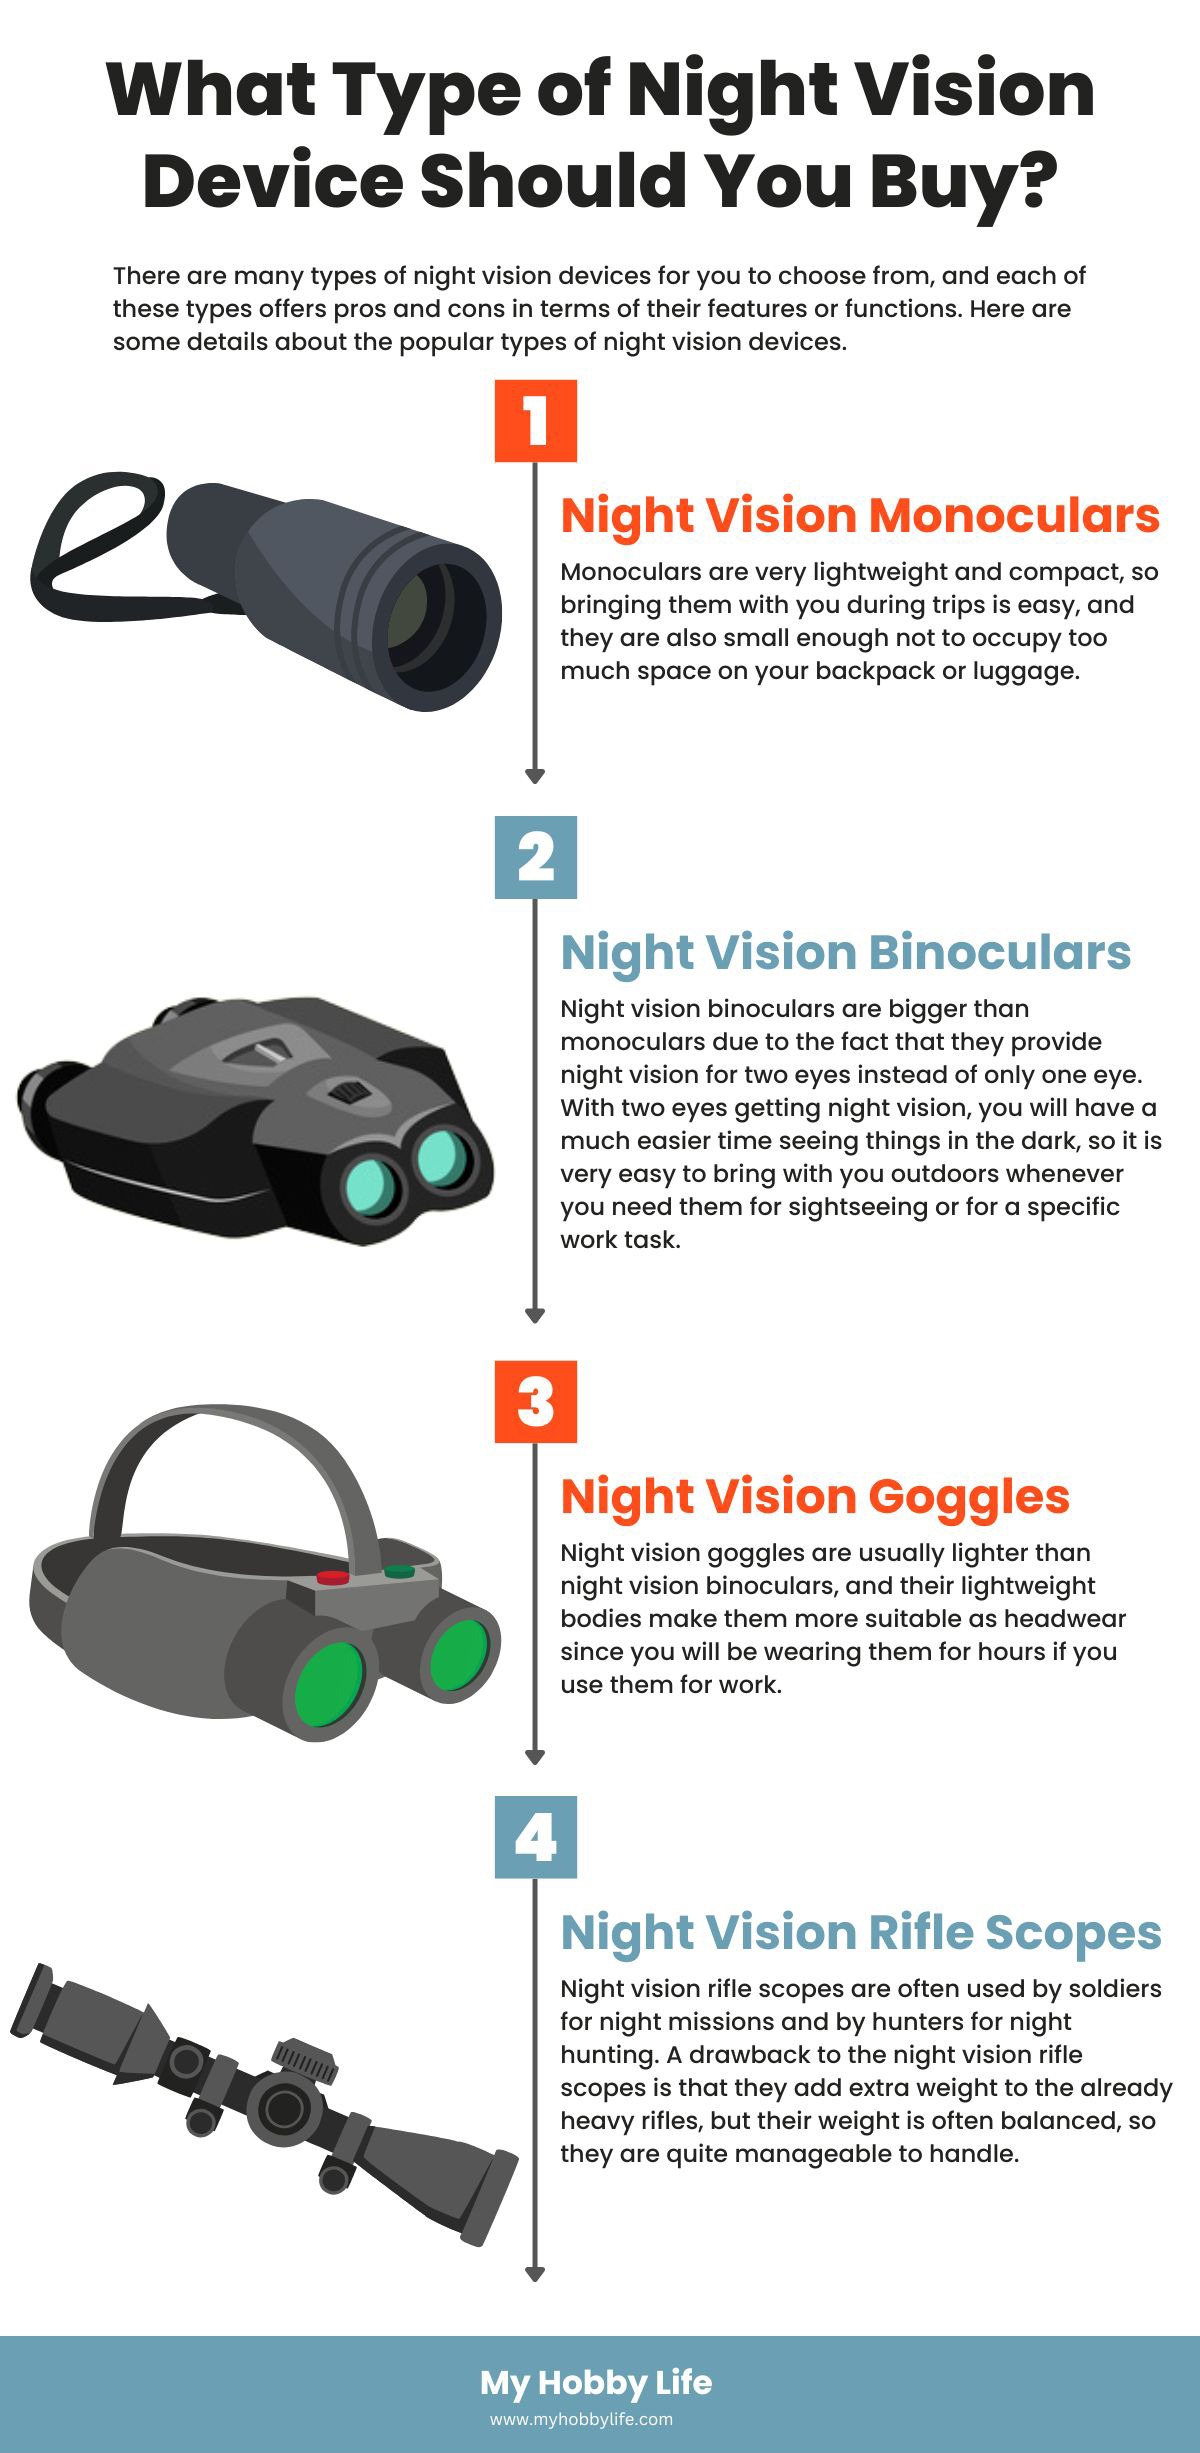 What Type of Night Vision Device Should